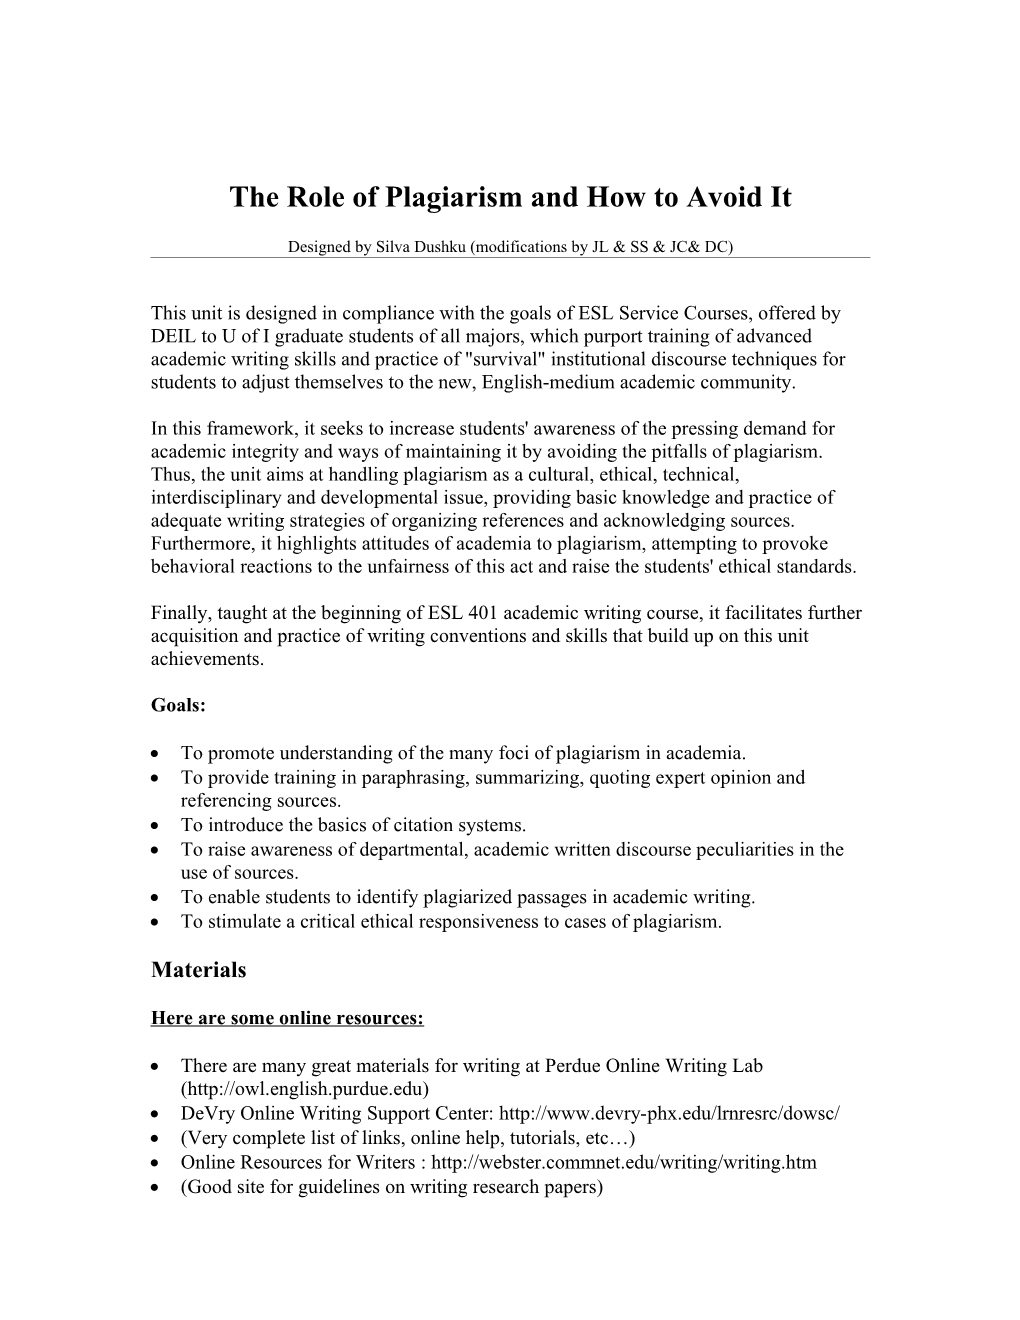 The Role of Plagiarism and How to Avoid It